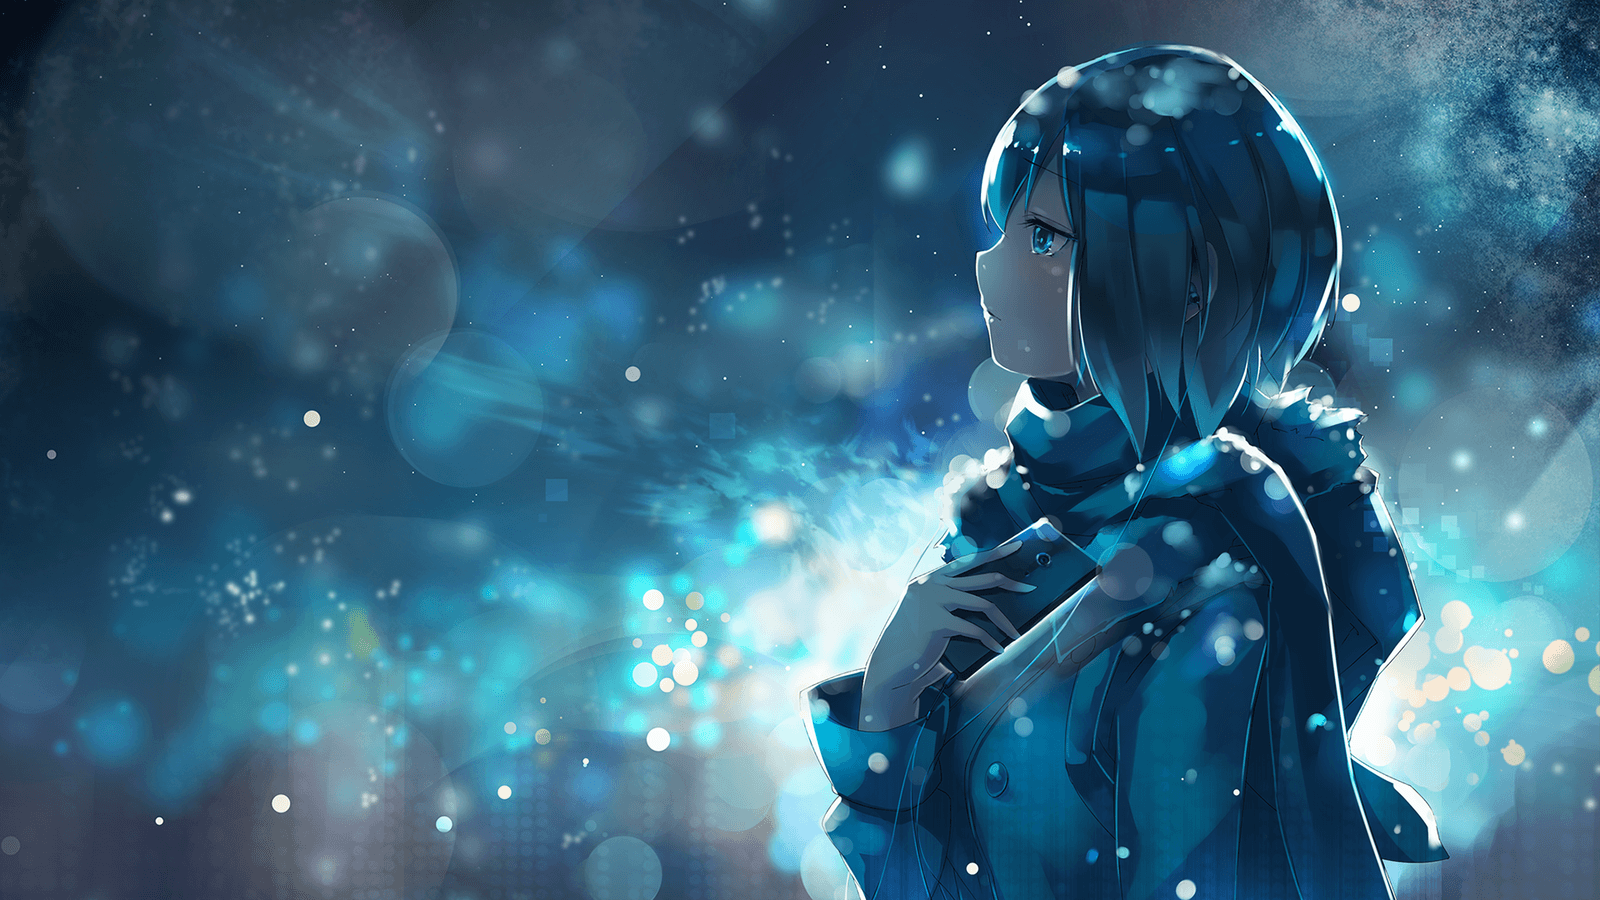 anime wallpaper hd pack download